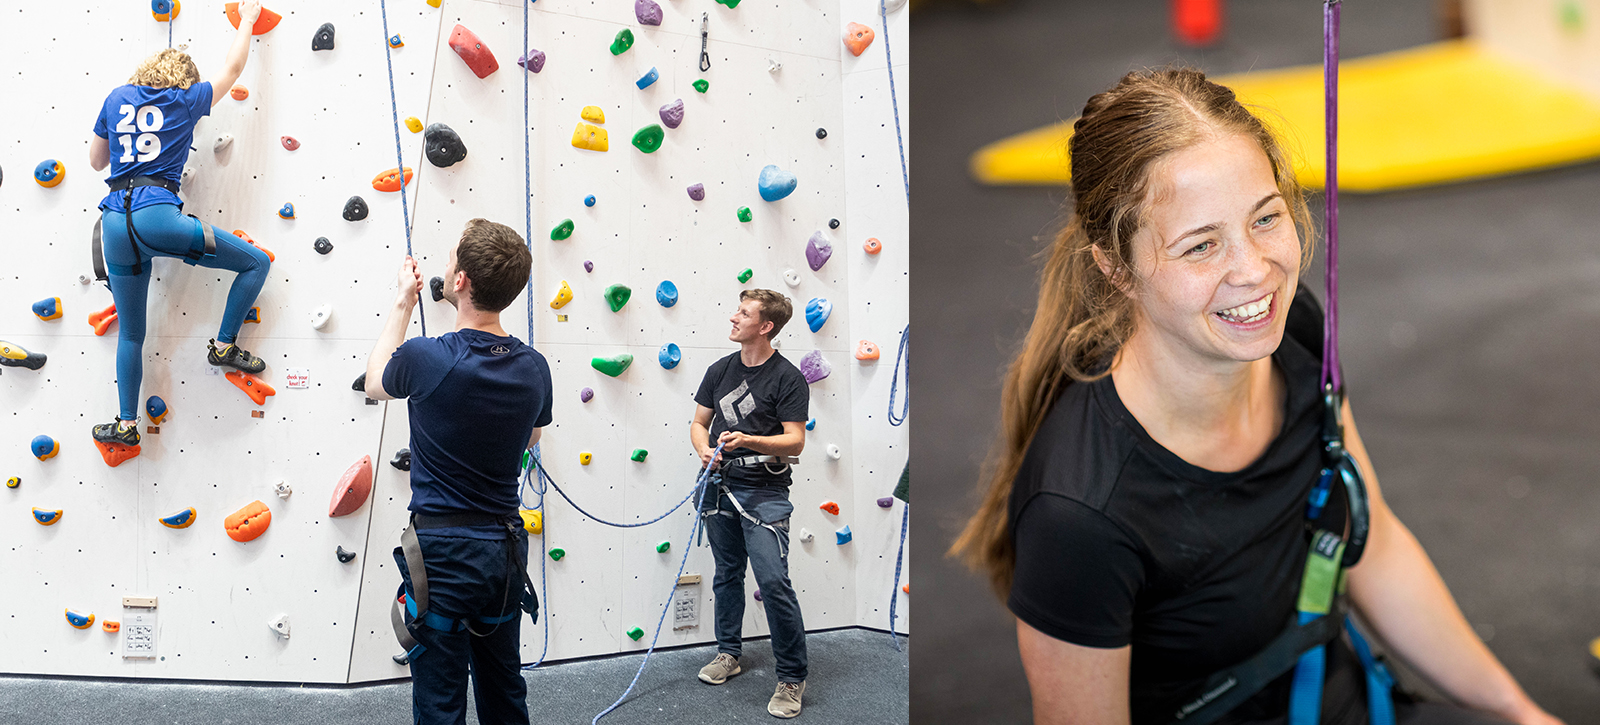 A coach helps someone to climb while someone else learns to belay. In another image a woman is smiling after climbing